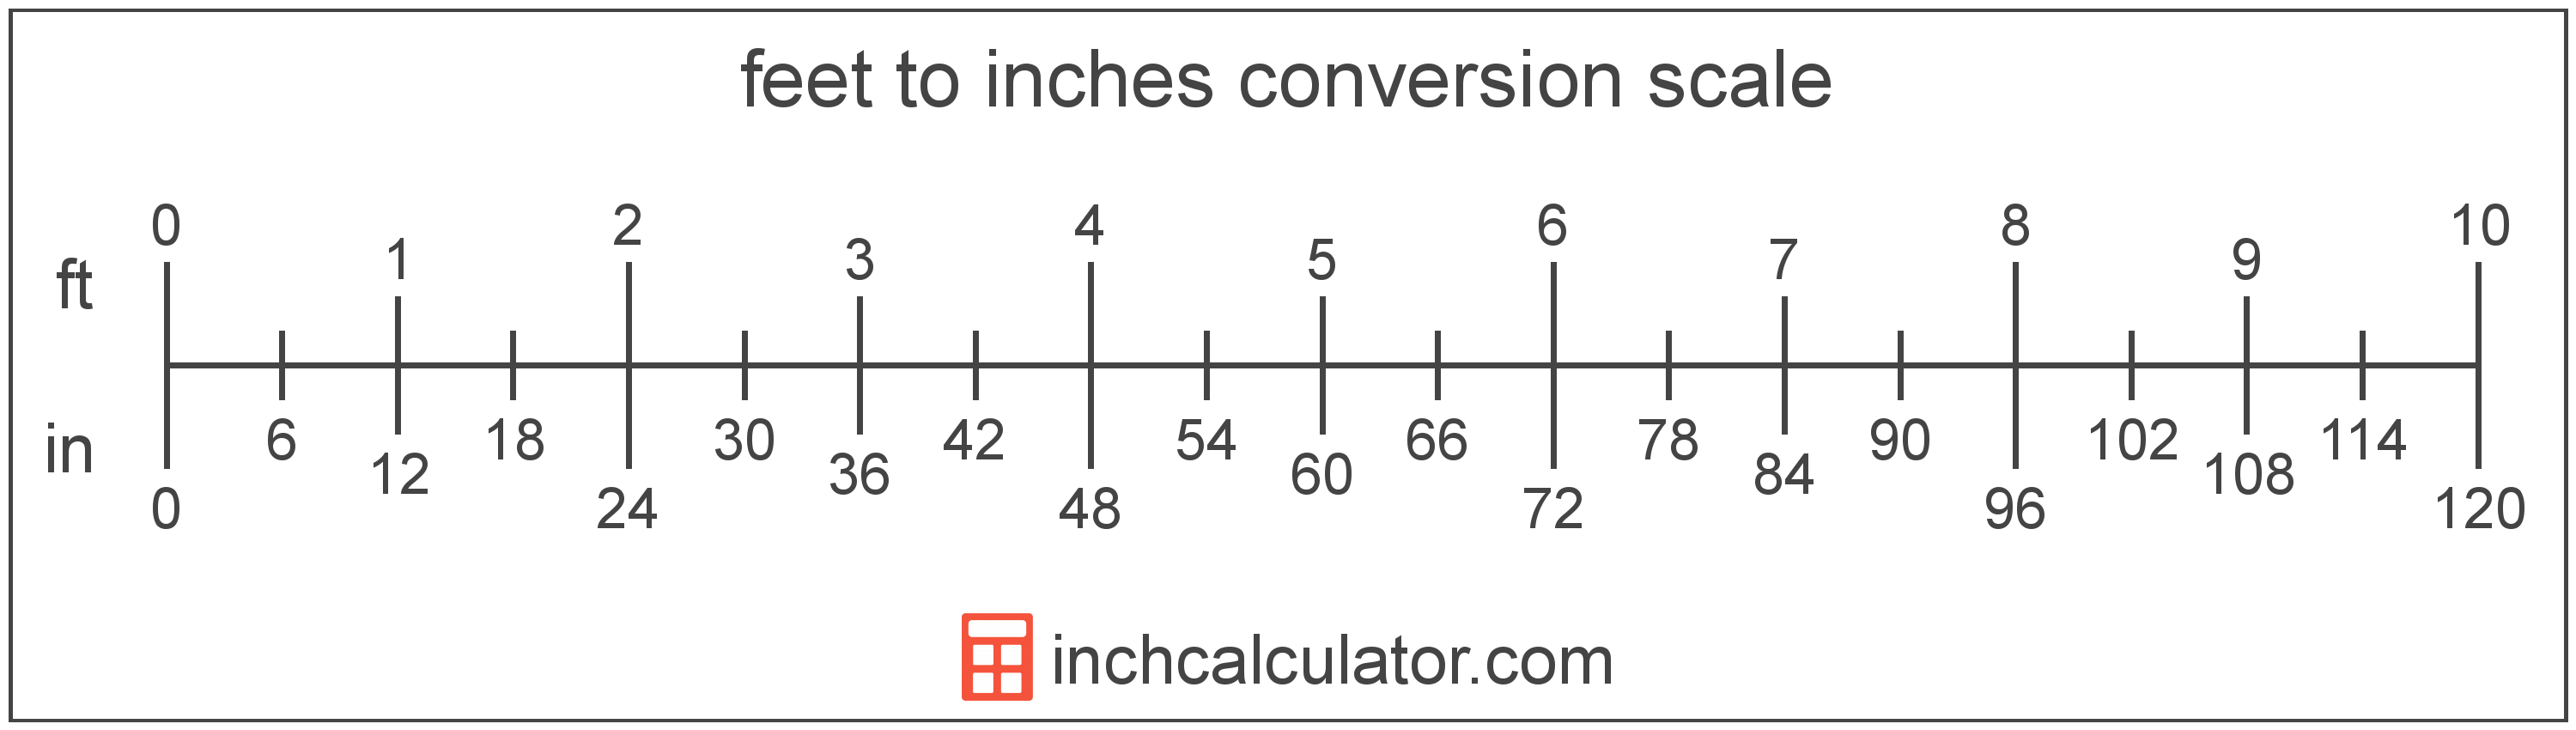 conversion scale showing feet and equivalent inches length values